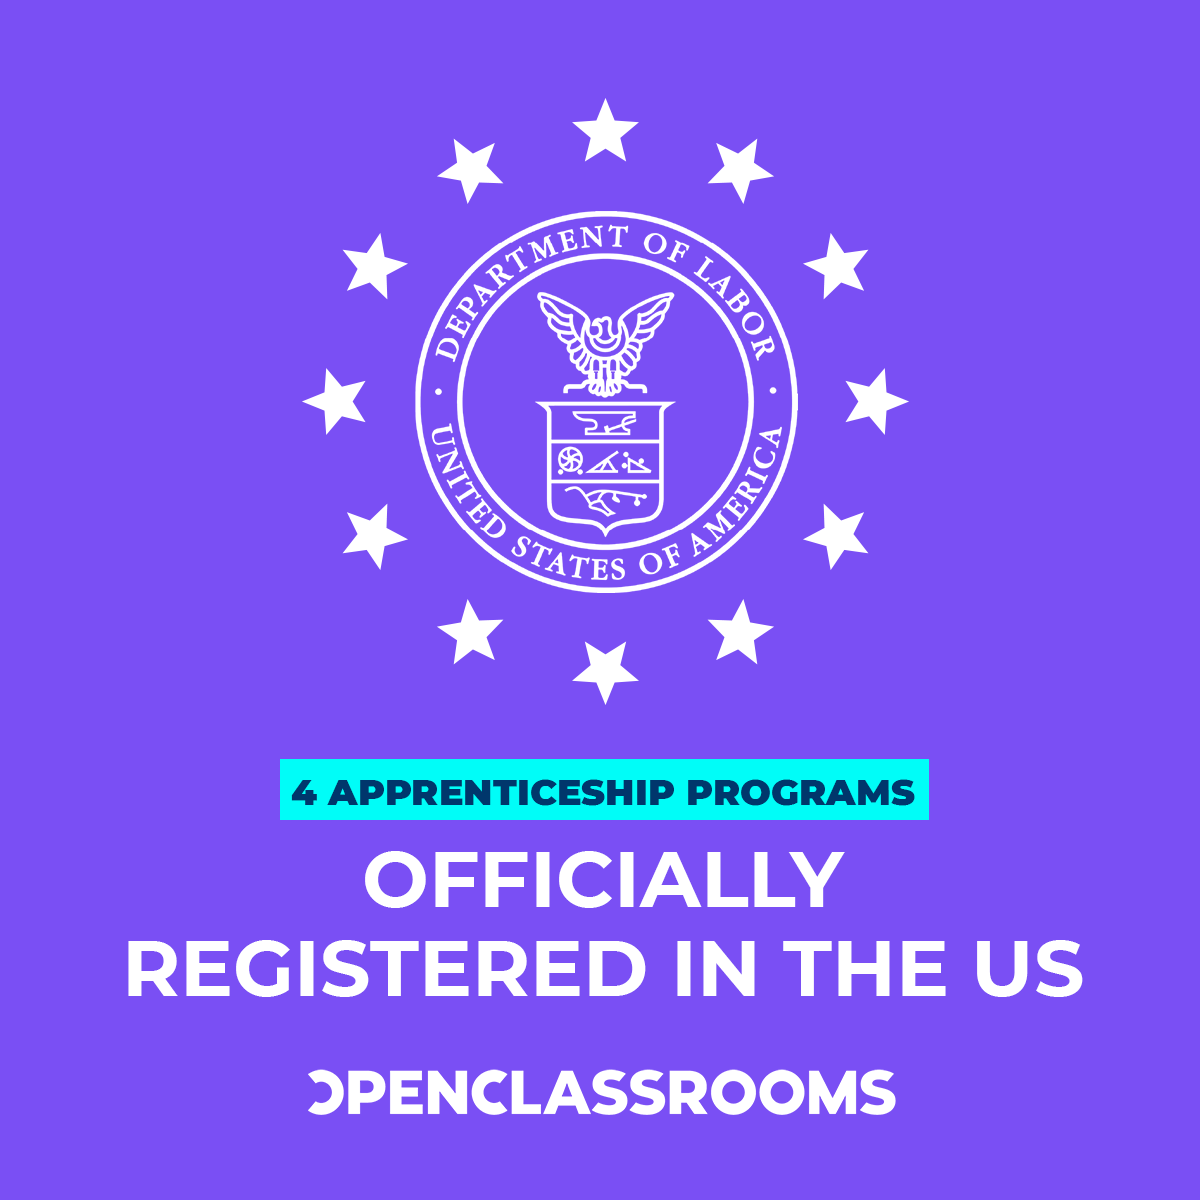 Four of @OpenClassrooms’ #apprenticeship programs are now registered with the @USDOL! This recognition allows us to act as an intermediary for employers seeking to grow their own talent and provide #equity for those shut out from exciting #tech careers: info.openclassrooms.com/us-apprentices…